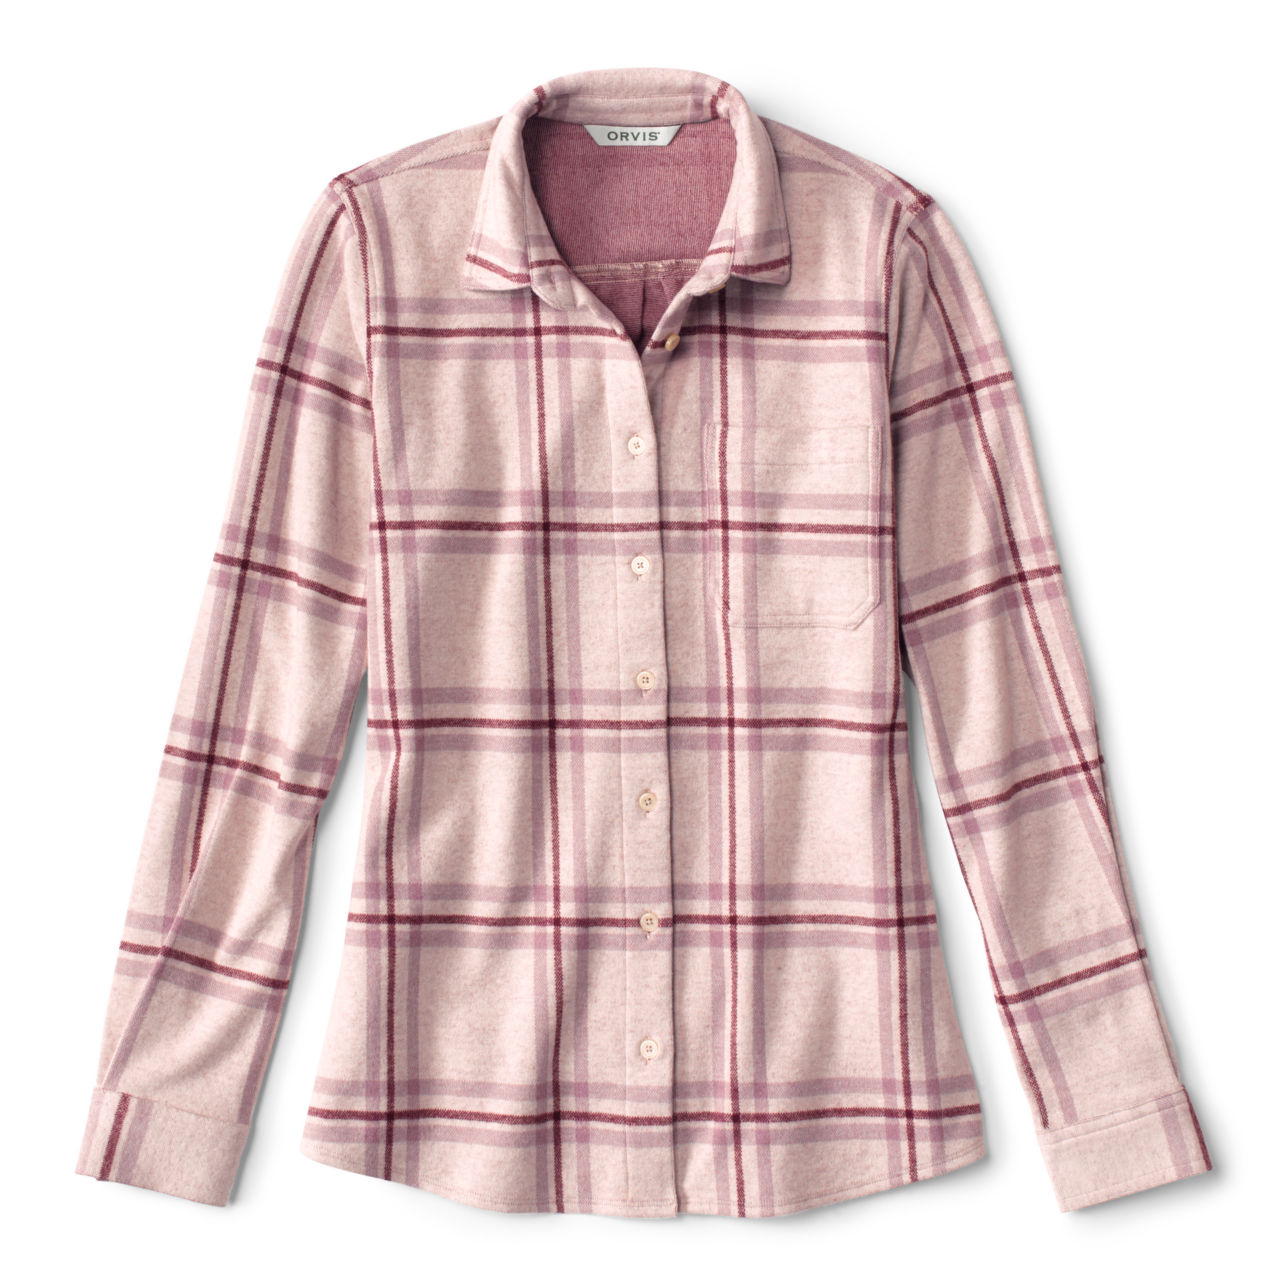 Women’s Snowy River Brushed Knit Long-Sleeved Shirt - VANILLA PLAID image number 0